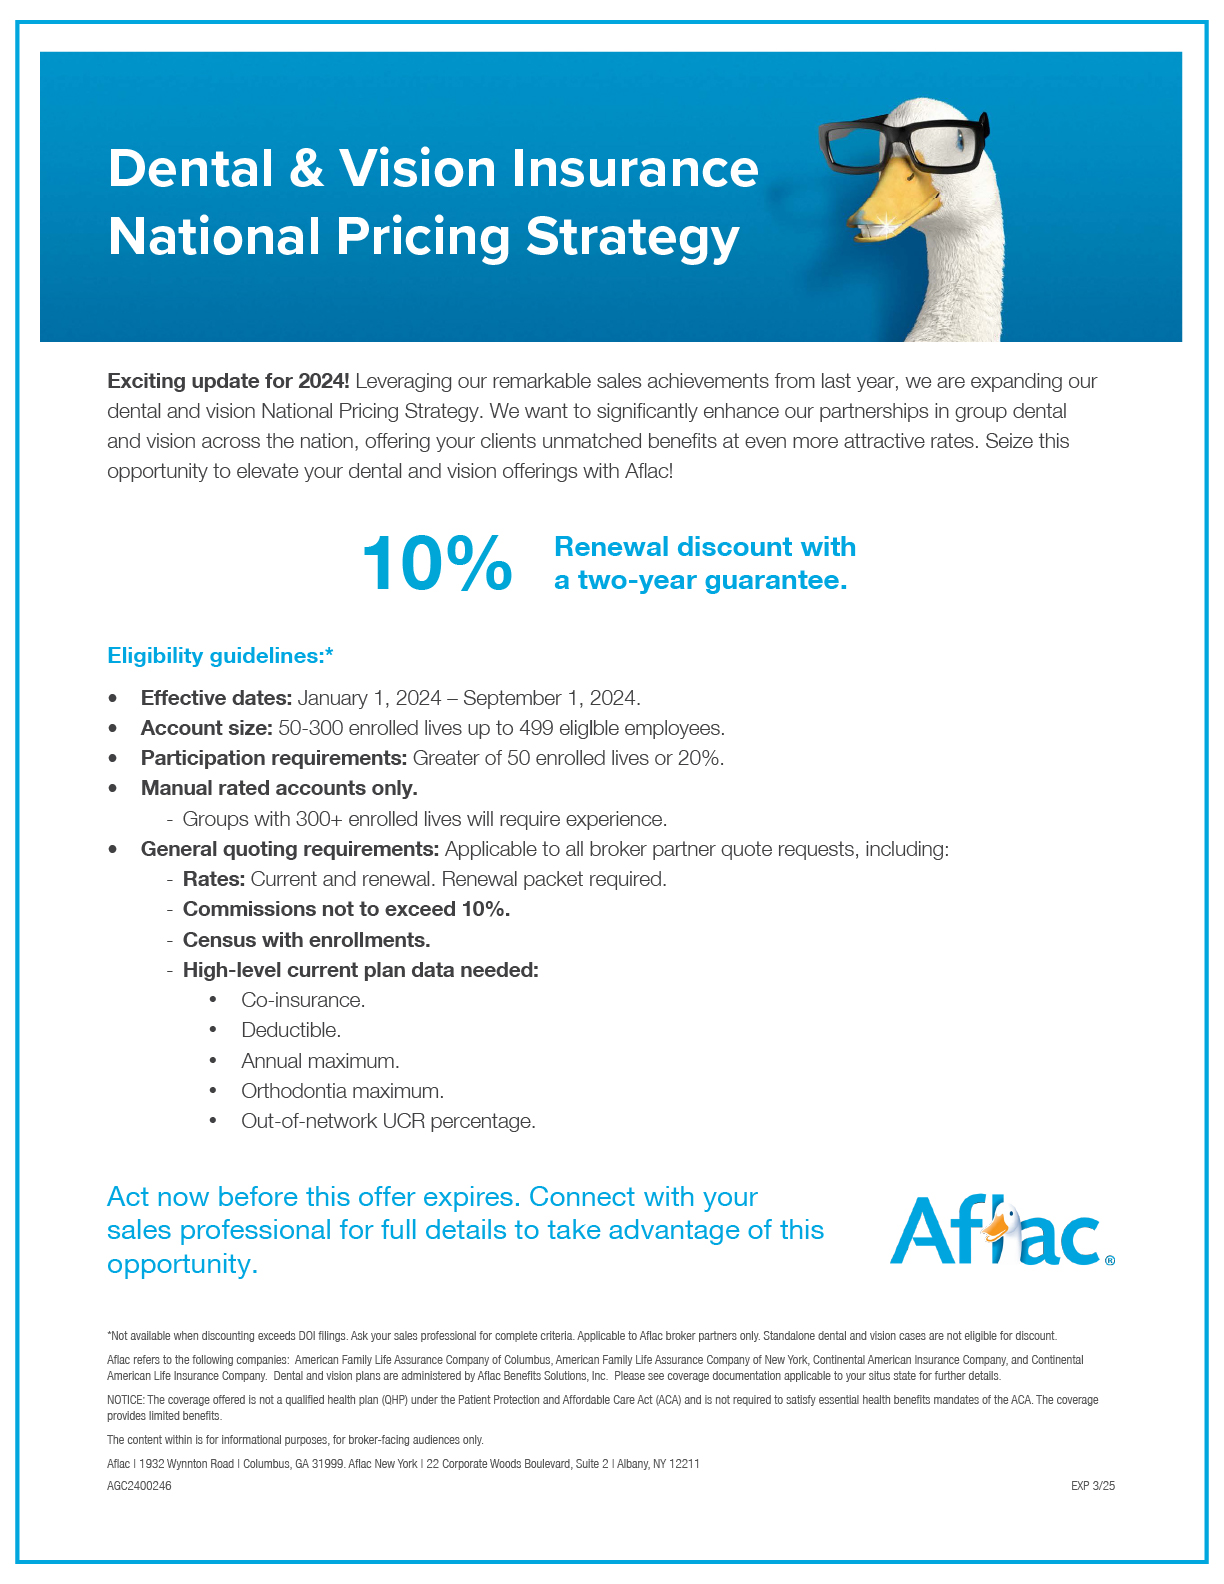 National Pricing Strategy